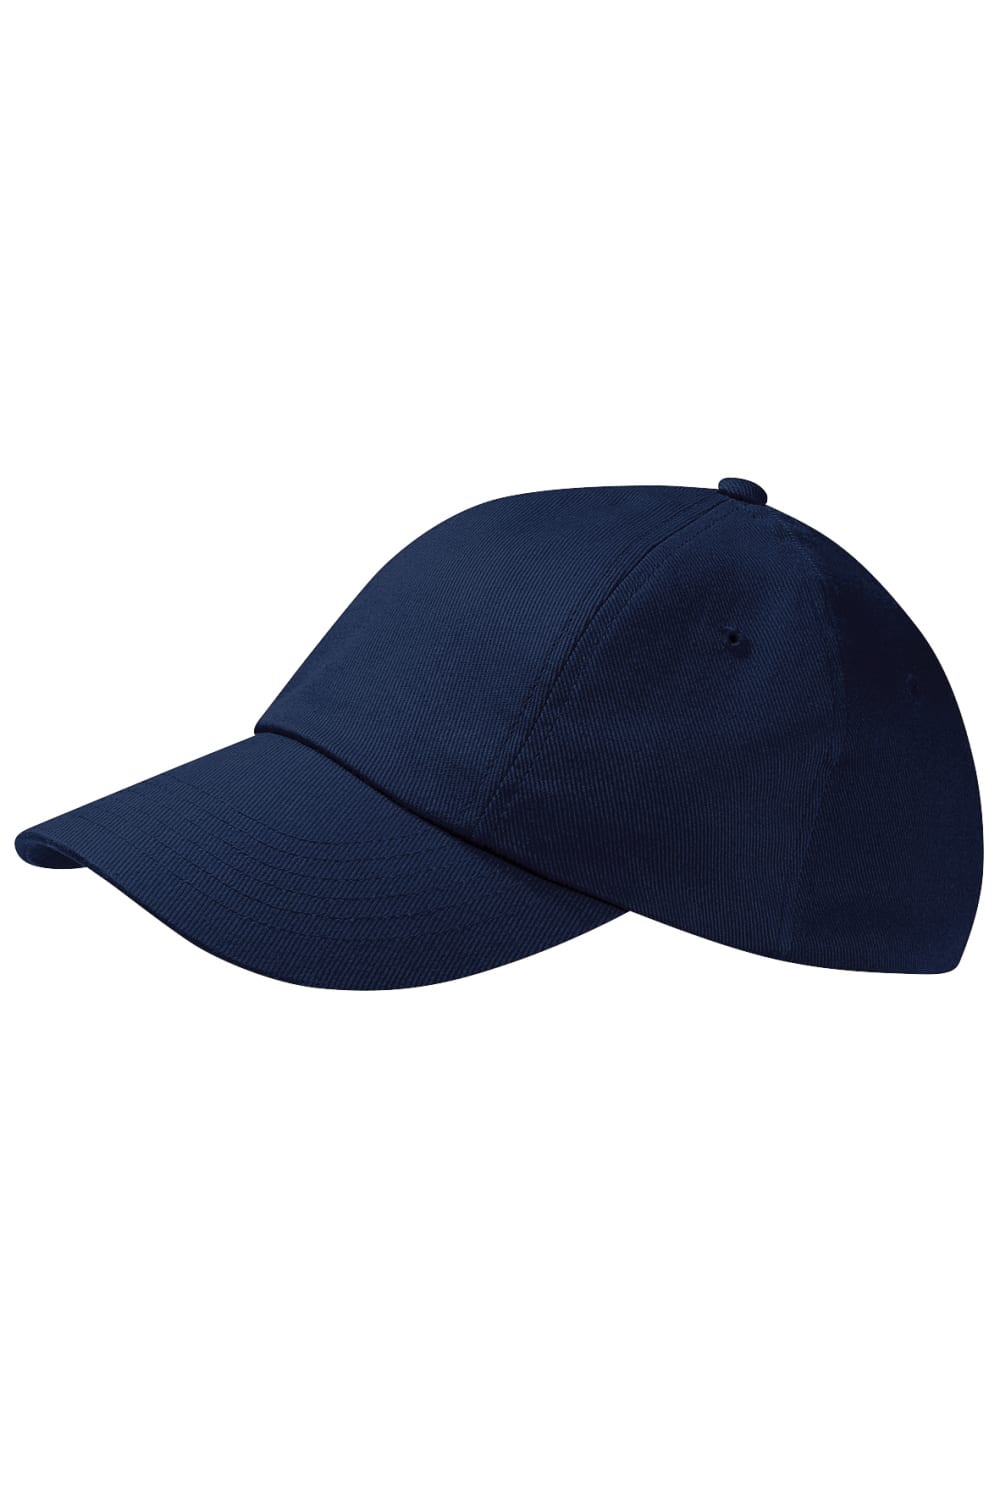 Unisex Low Profile Heavy Cotton Drill Cap / Headwear (Pack of 2) - French Navy